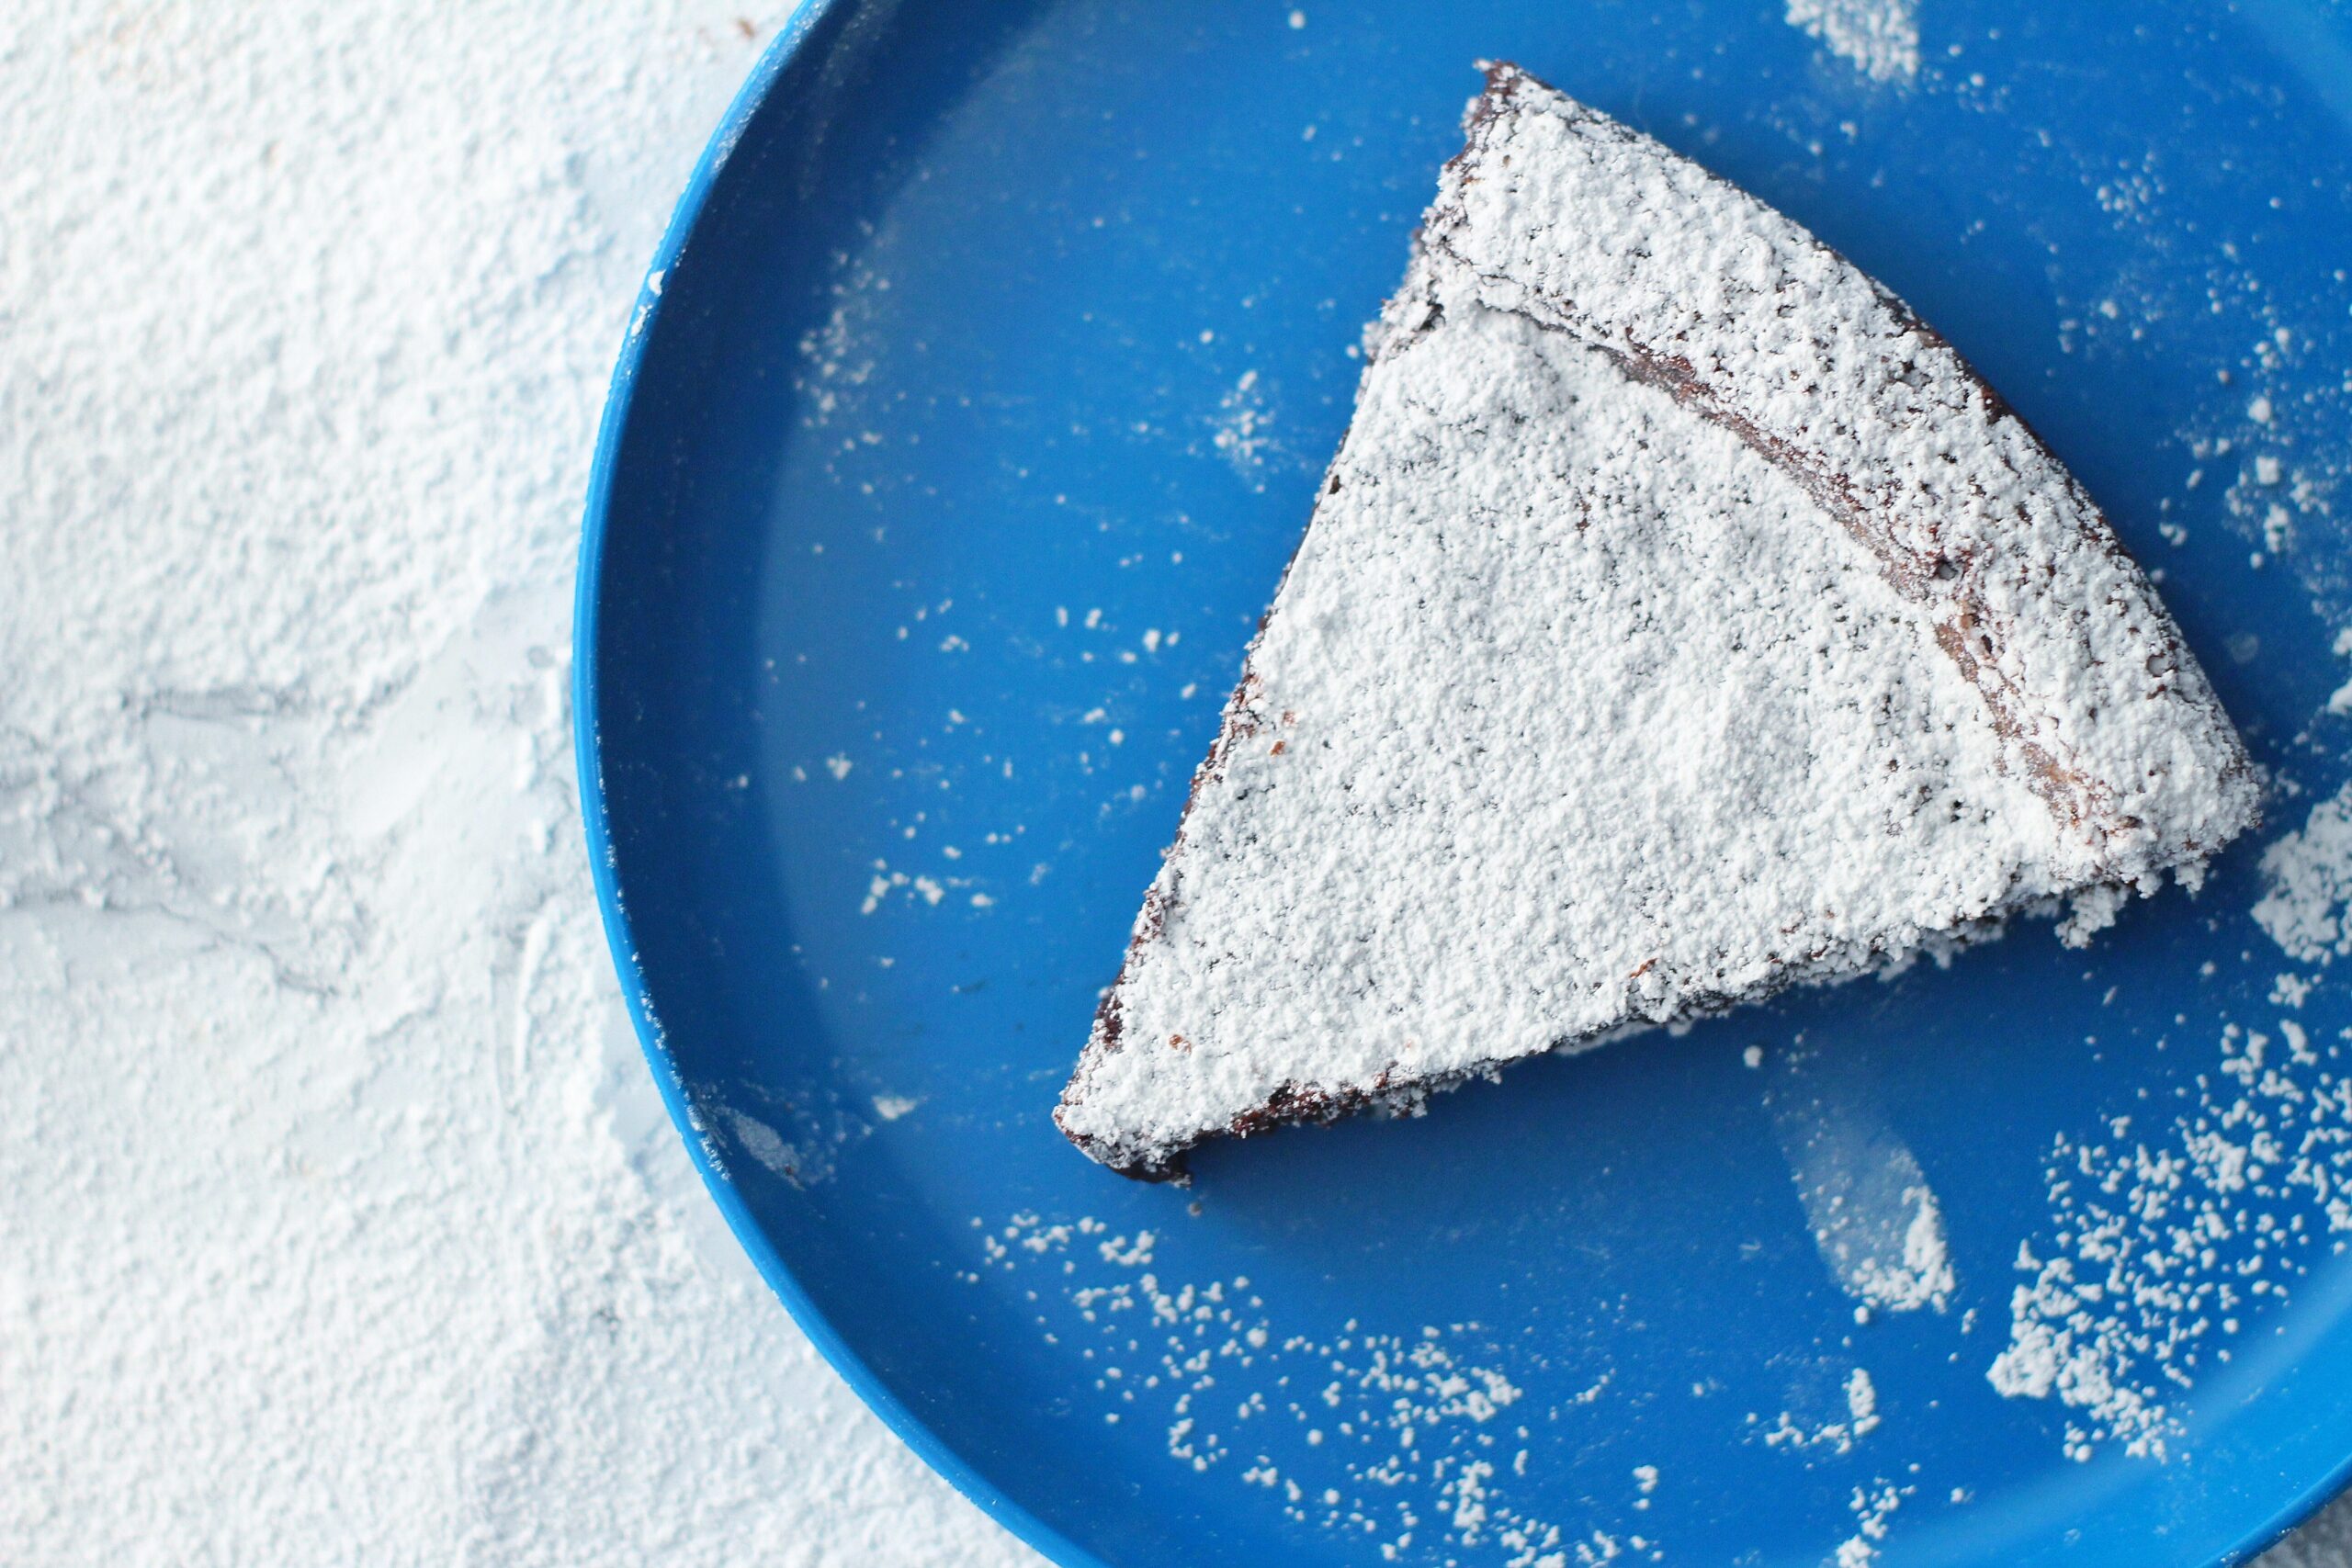 Slice of flourless chocolate cake on a round blue plate on top of a marbled surface covered in powdered sugar